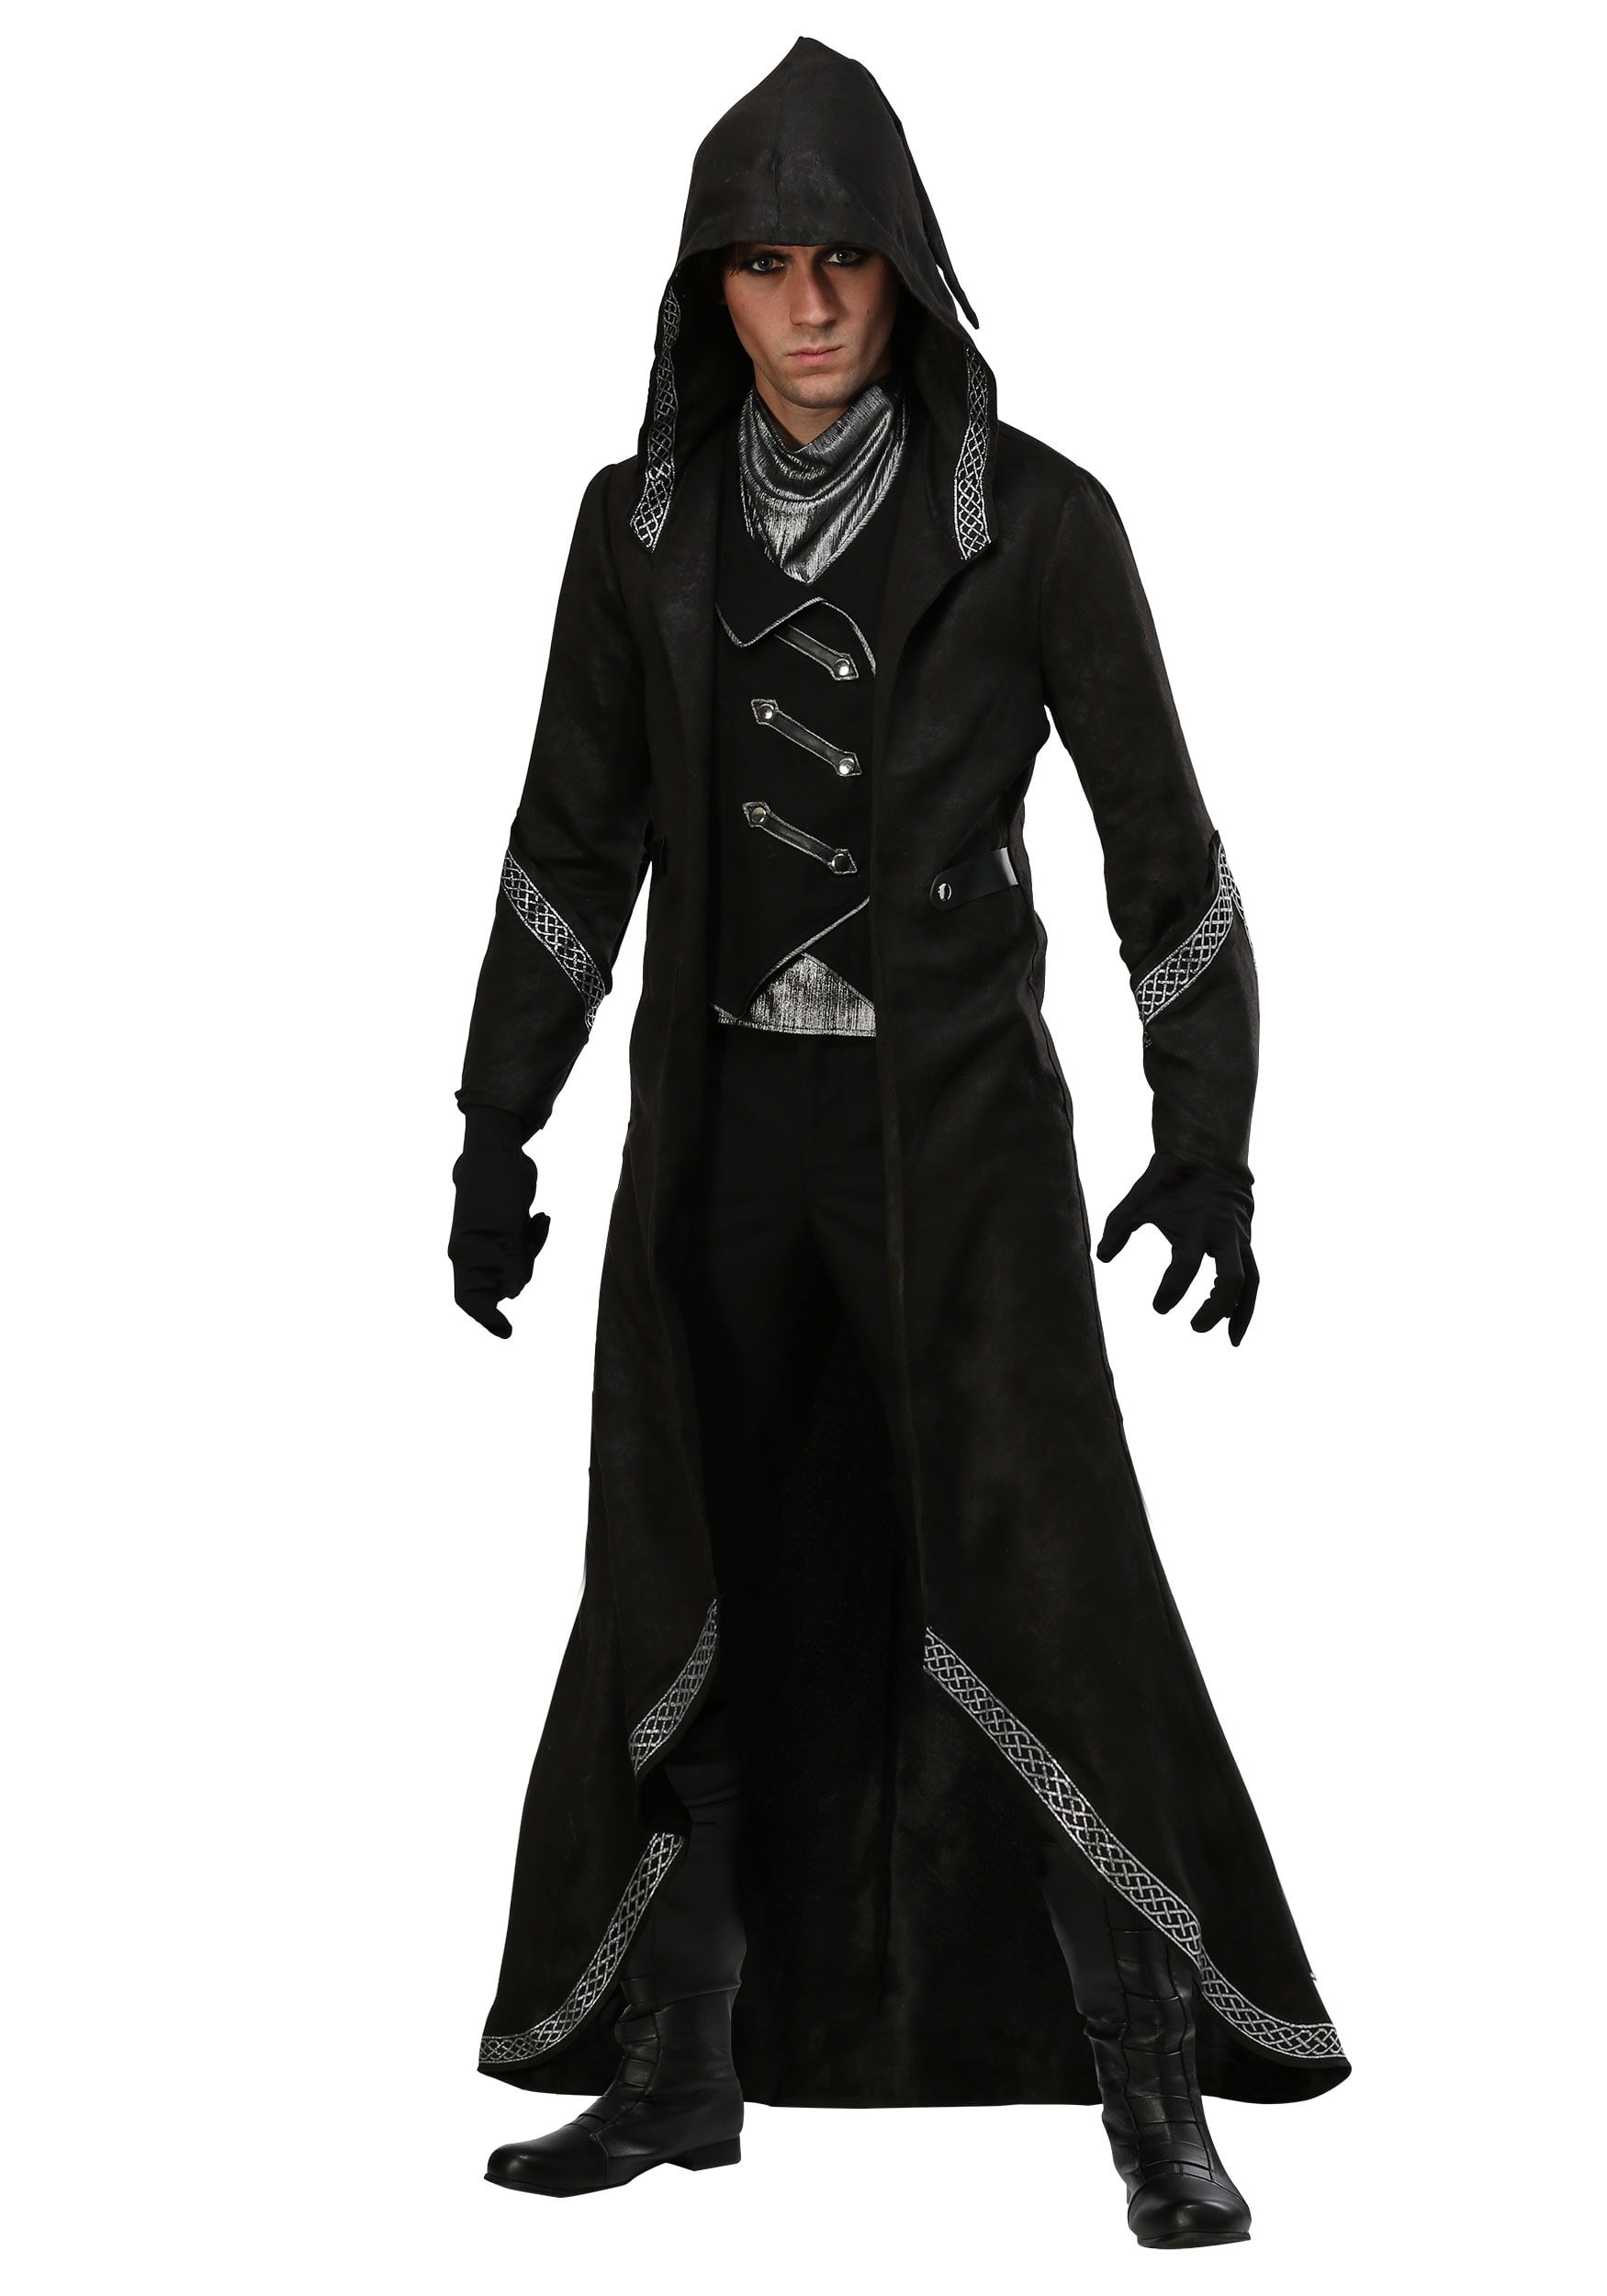 This is a Men's Modern Warlock Costume.